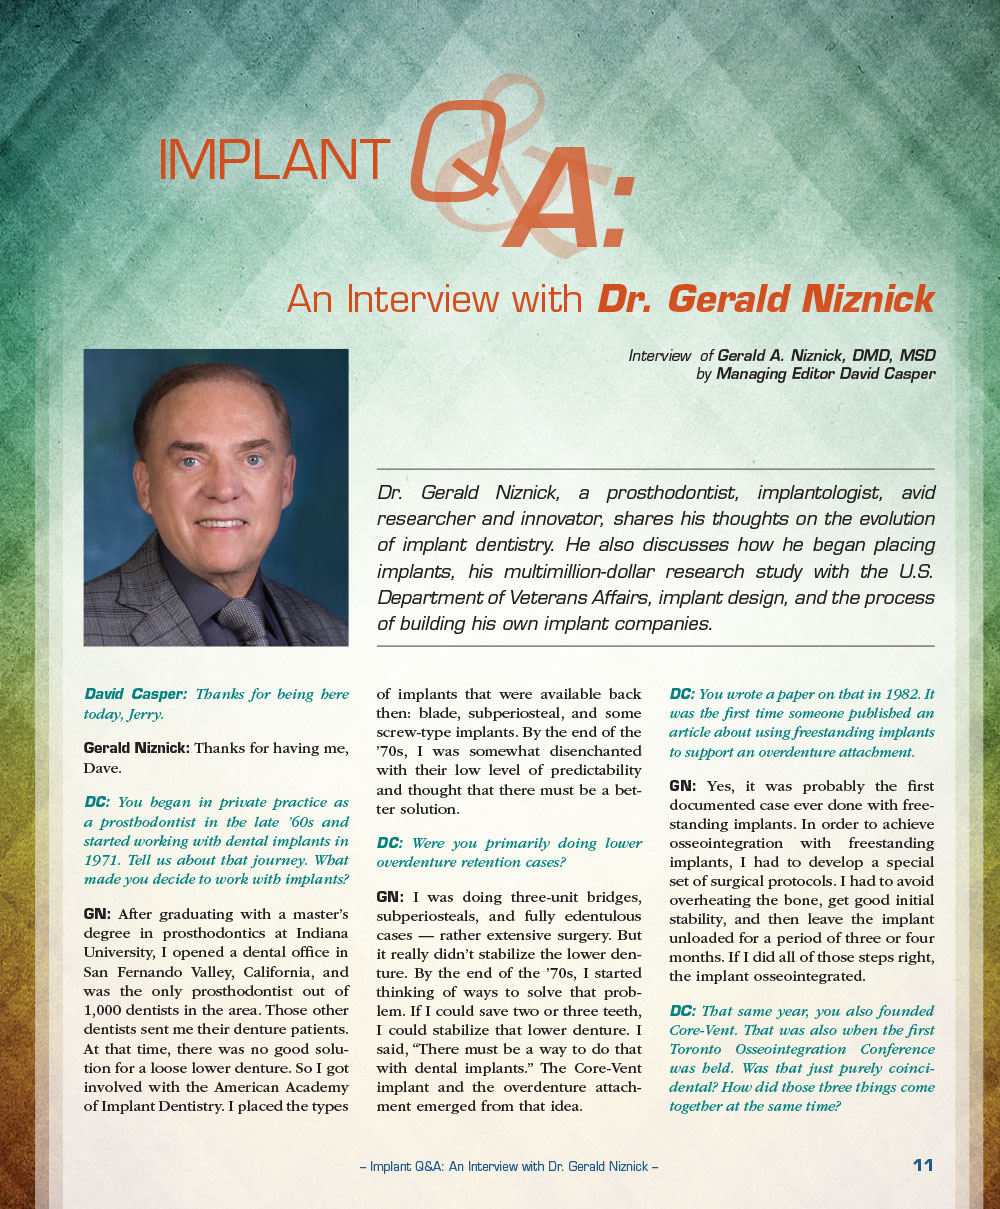 Implant Q&A: An Interview with Dr. Gerald Niznick